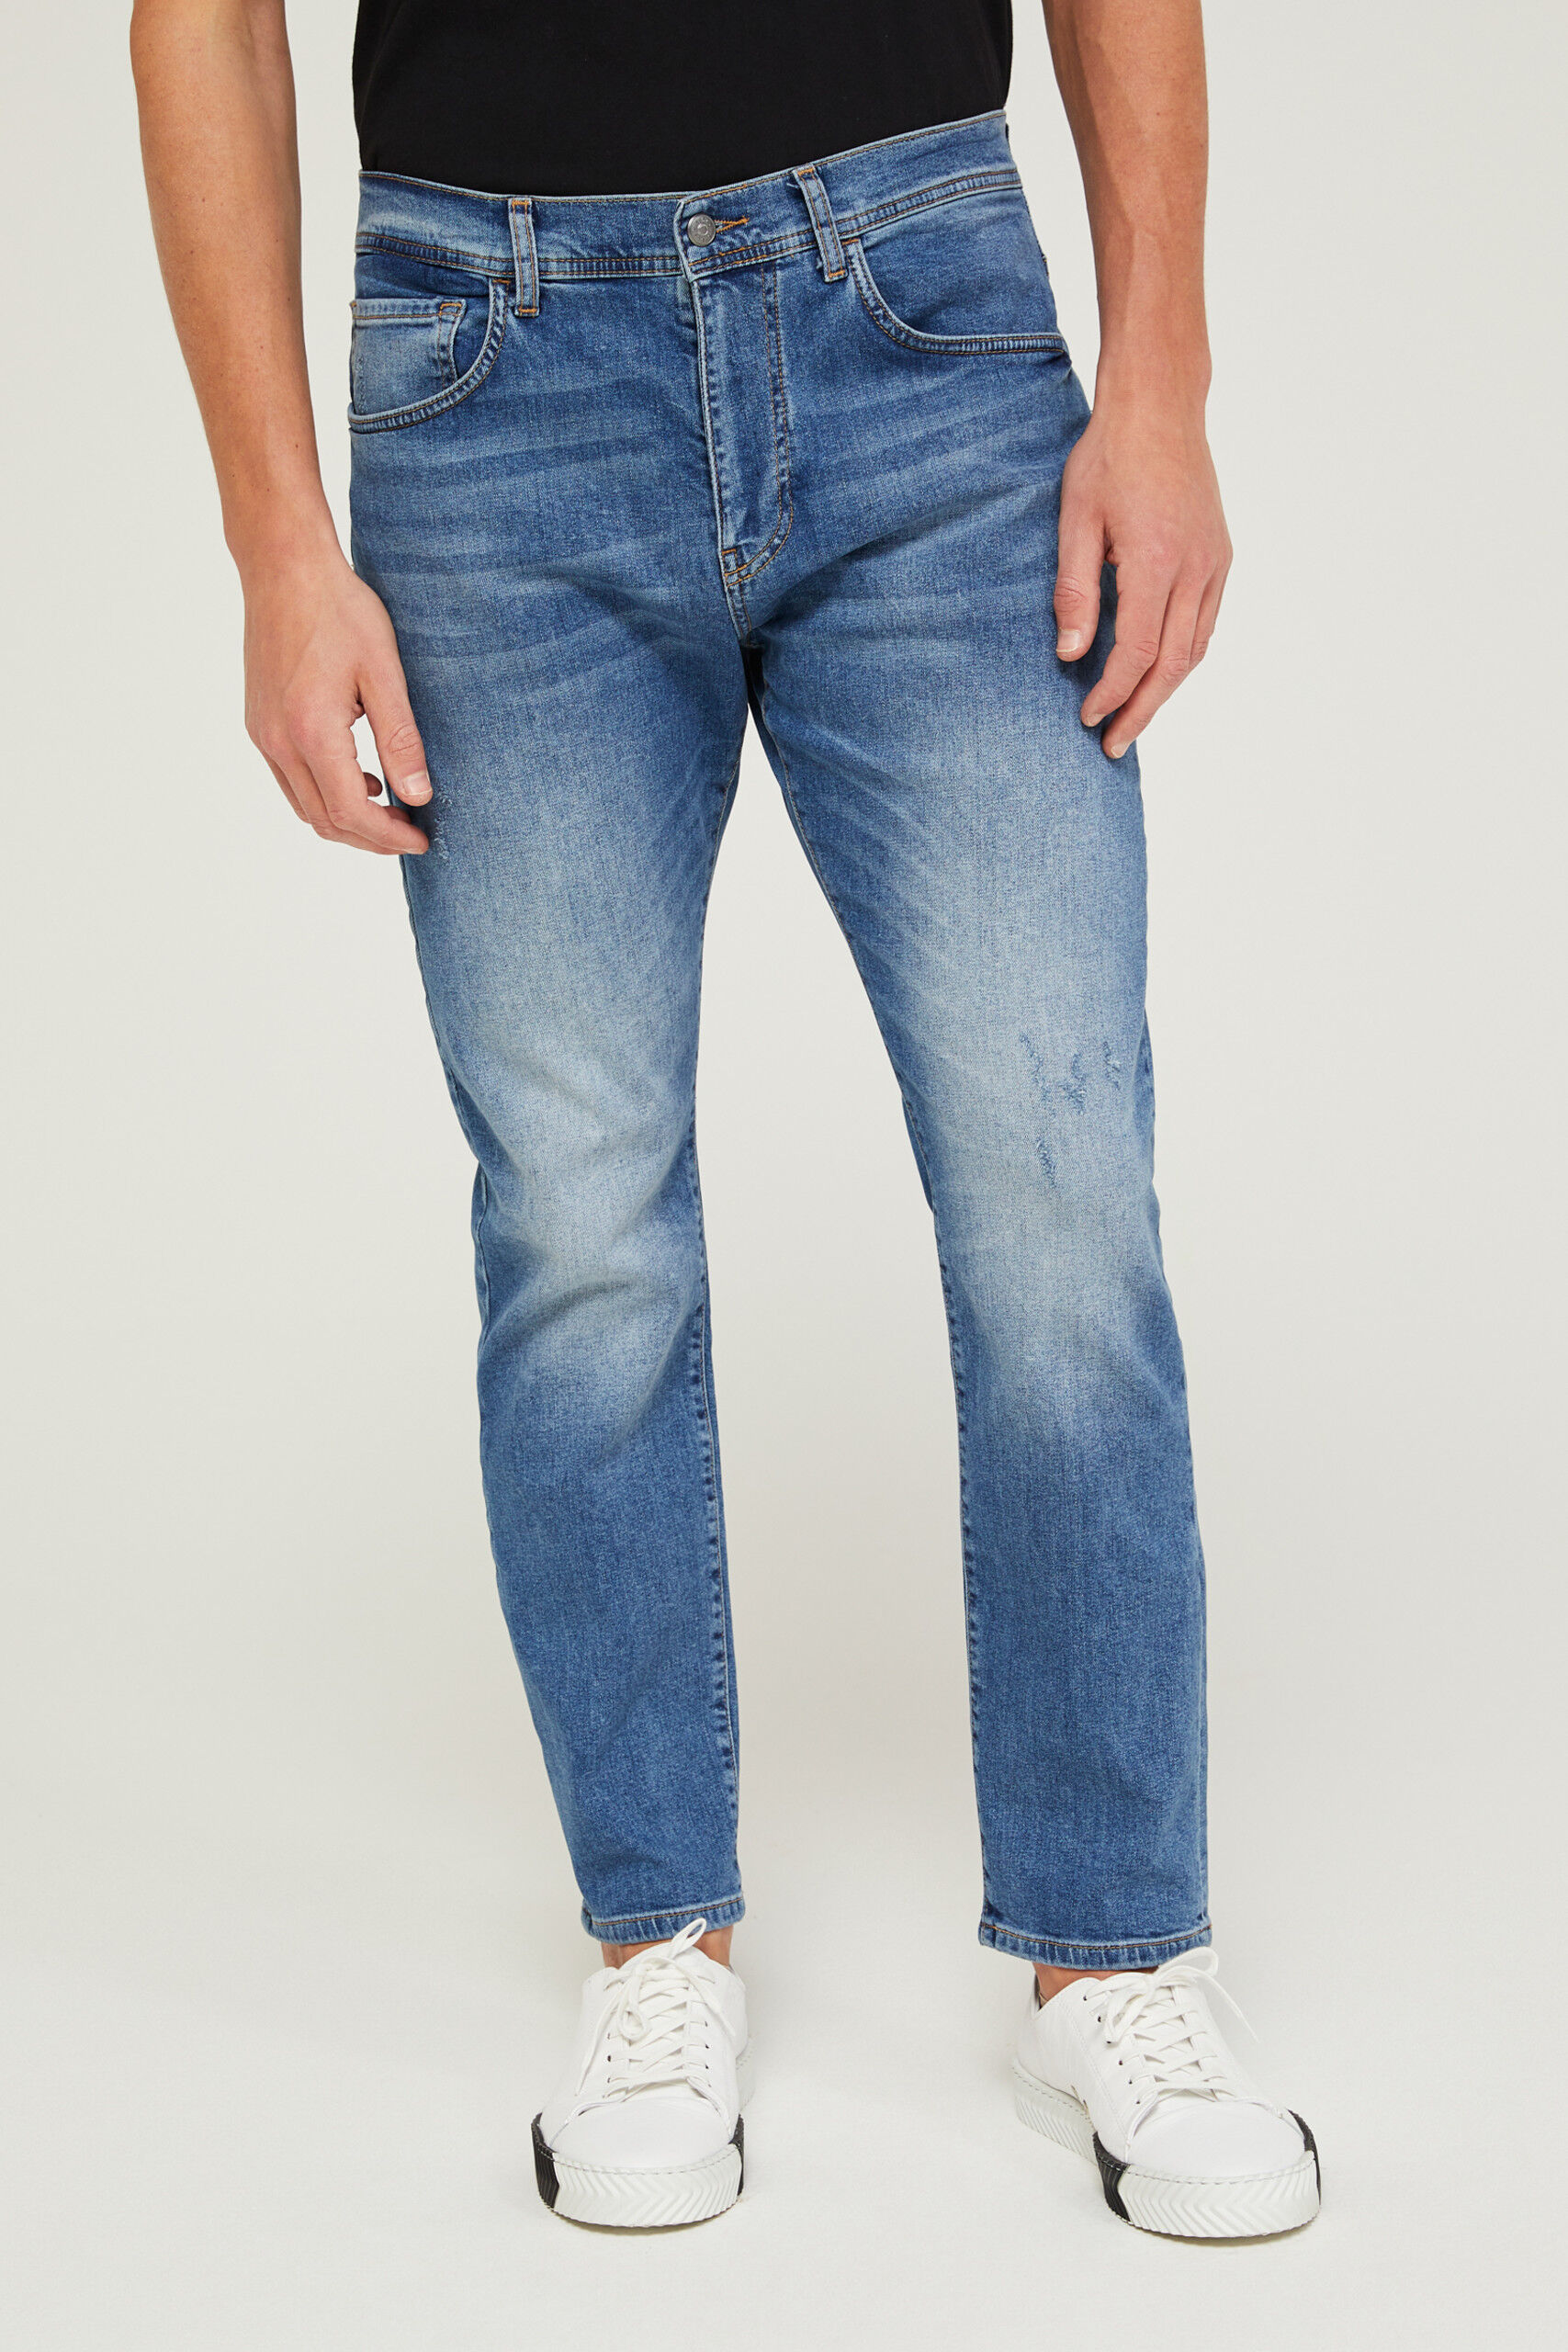 Men's Jeans New Collection 2021 | Sisley